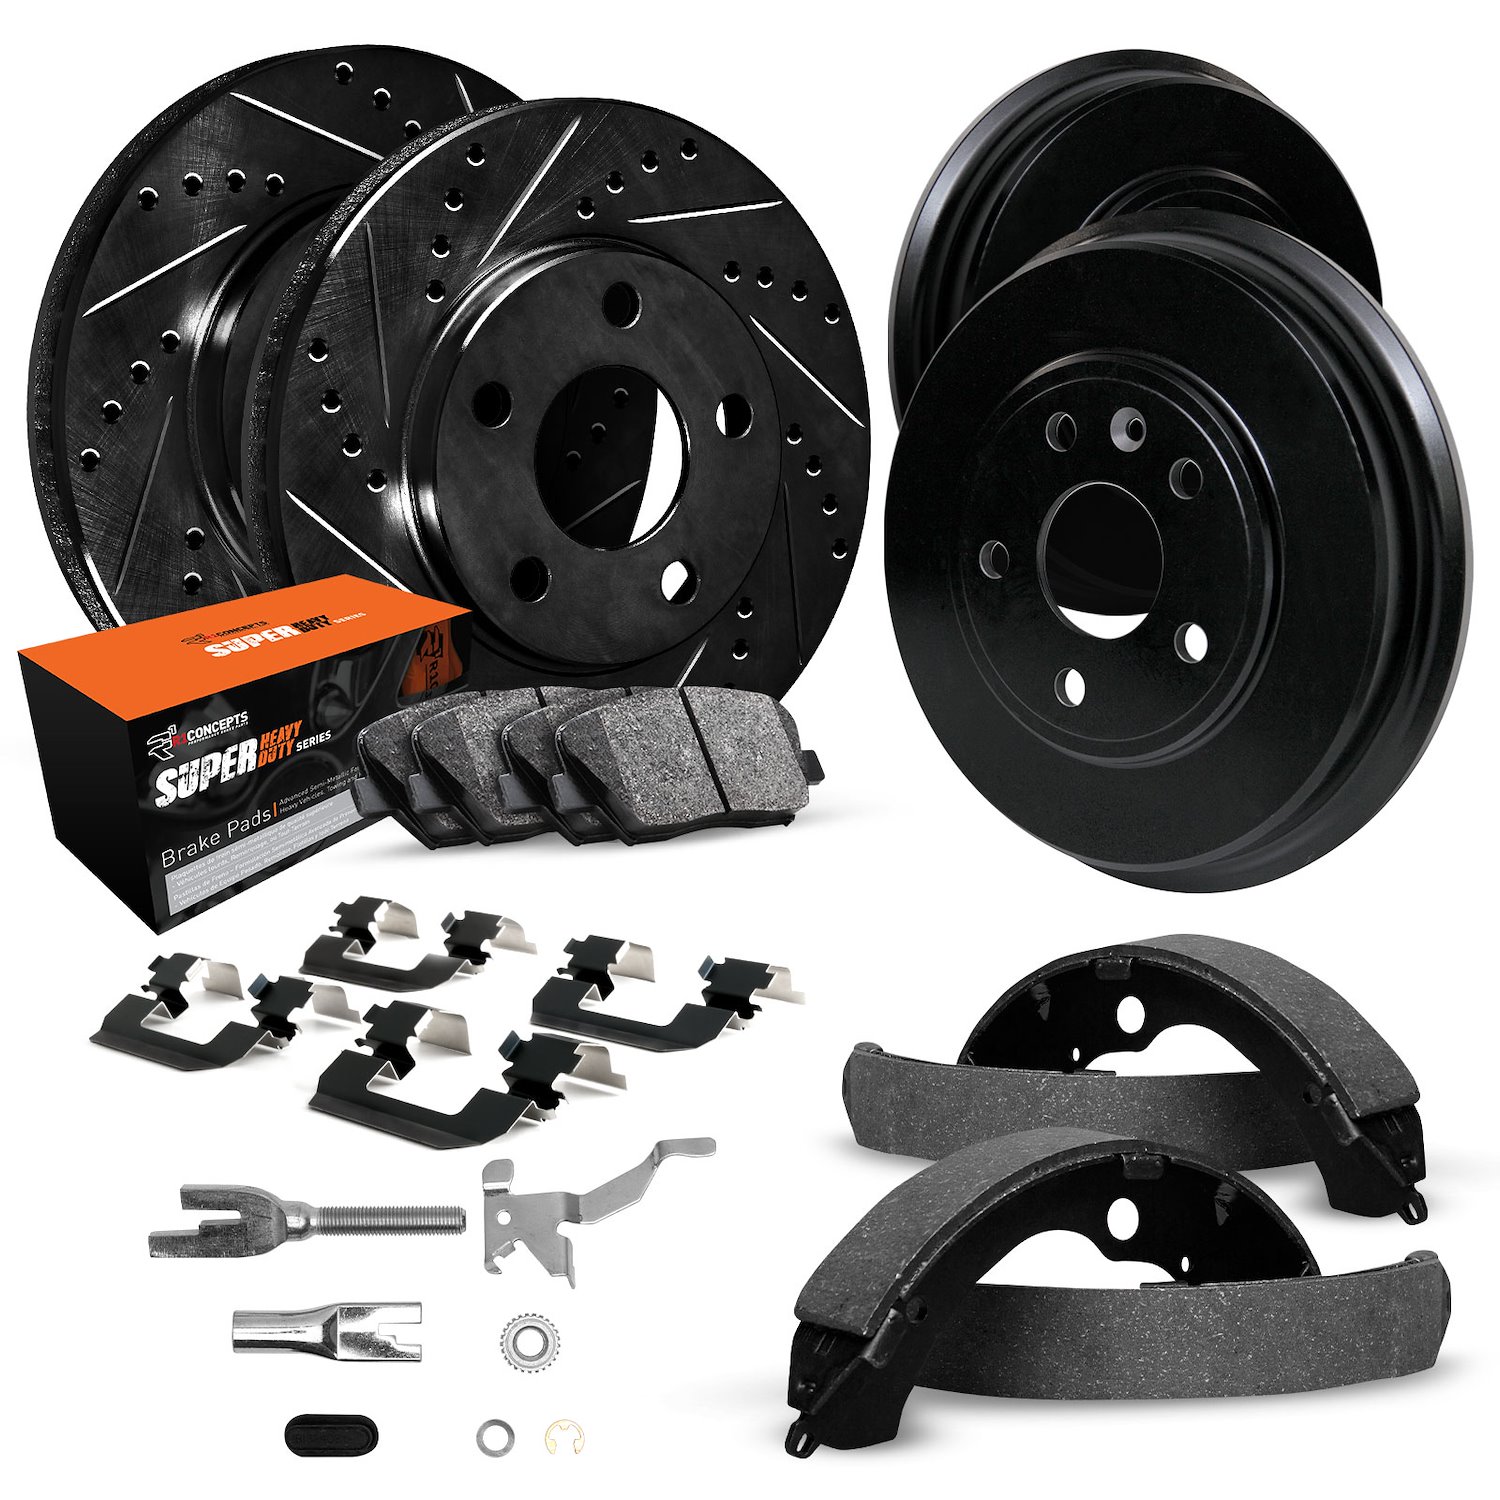 E-Line Drilled/Slotted Black Rotor & Drum Set w/Super-Duty Pads, Shoes, Hardware/Adjusters, 1988-1999 GM